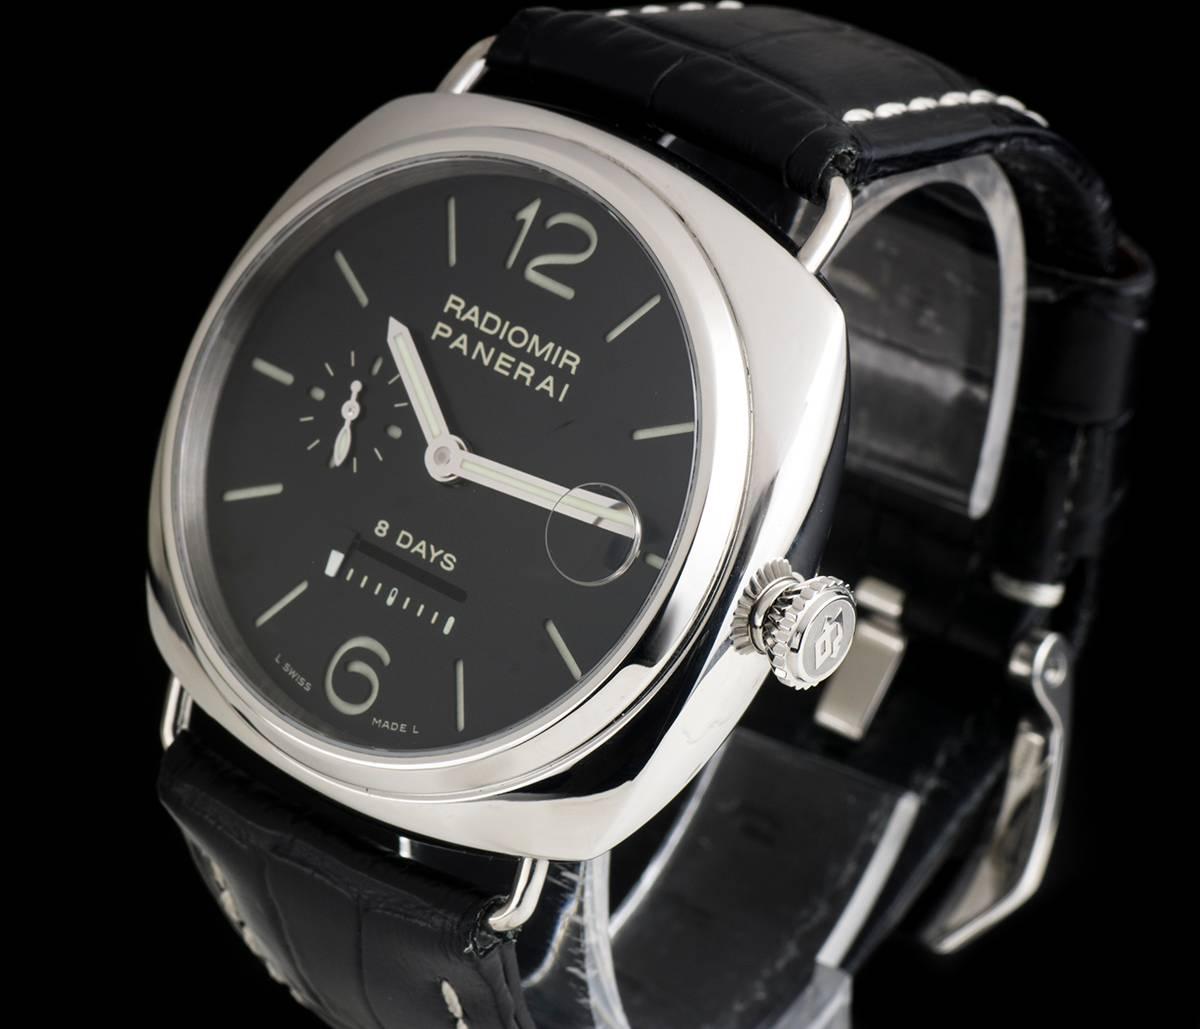 A Stainless Steel Radiomir 8 Days Gents Wristwatch, black dial with hour markers and arabic numbers 6 and 12, date at 3 0'clock, 8 day power reserve between 5 and 7 0'clock, small seconds at 9 0'clock, a fixed stainless steel bezel, a black leather